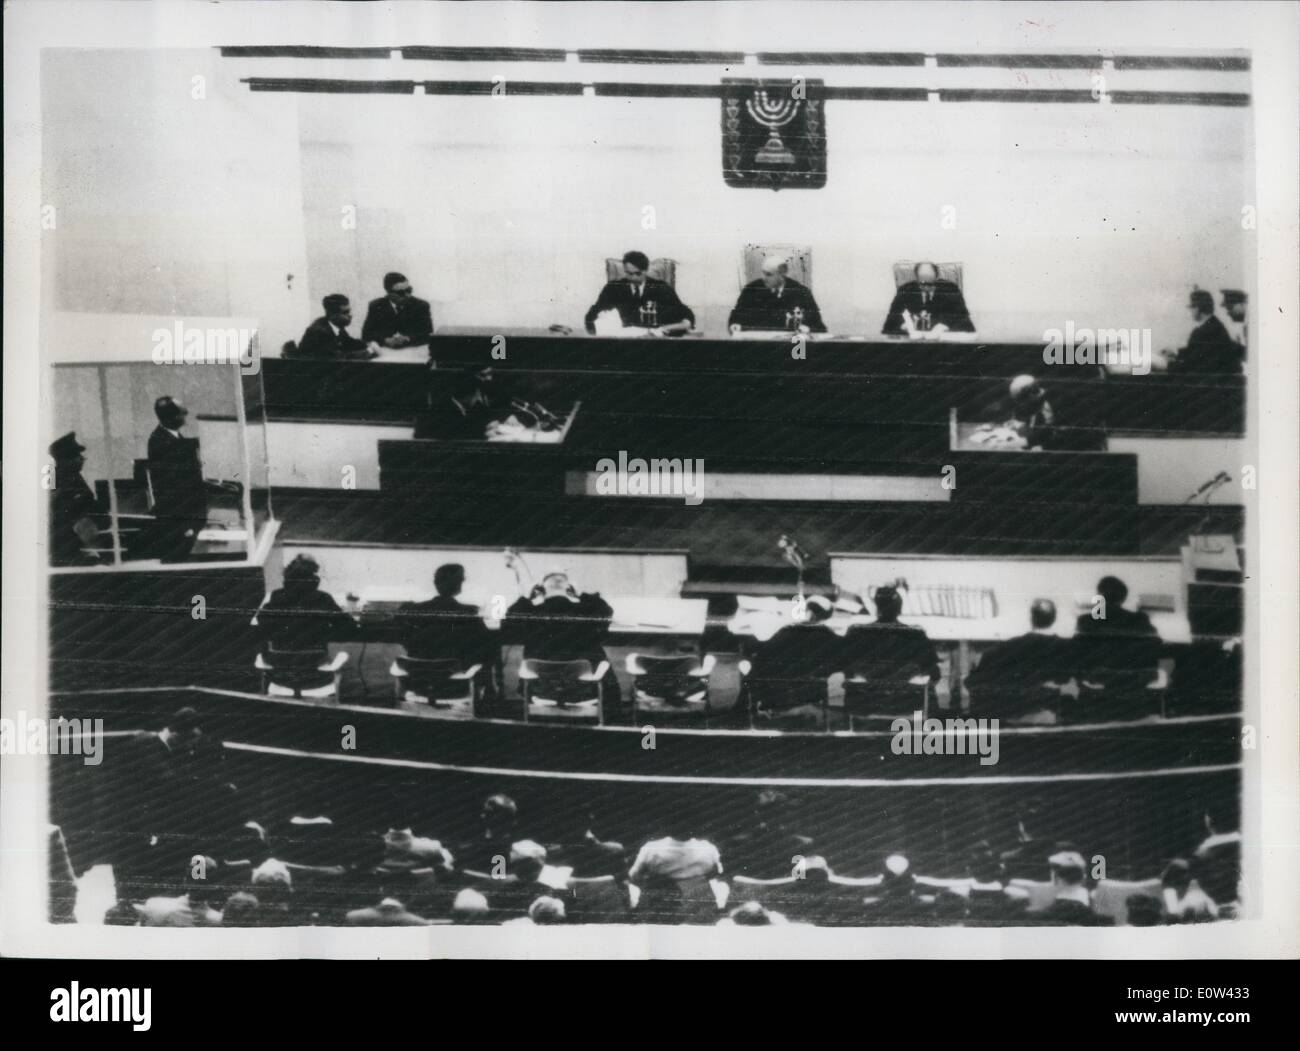 Apr. 04, 1961 - Opening of the Adolf Eichmann Trial - in Jerusalem. Stock Photo